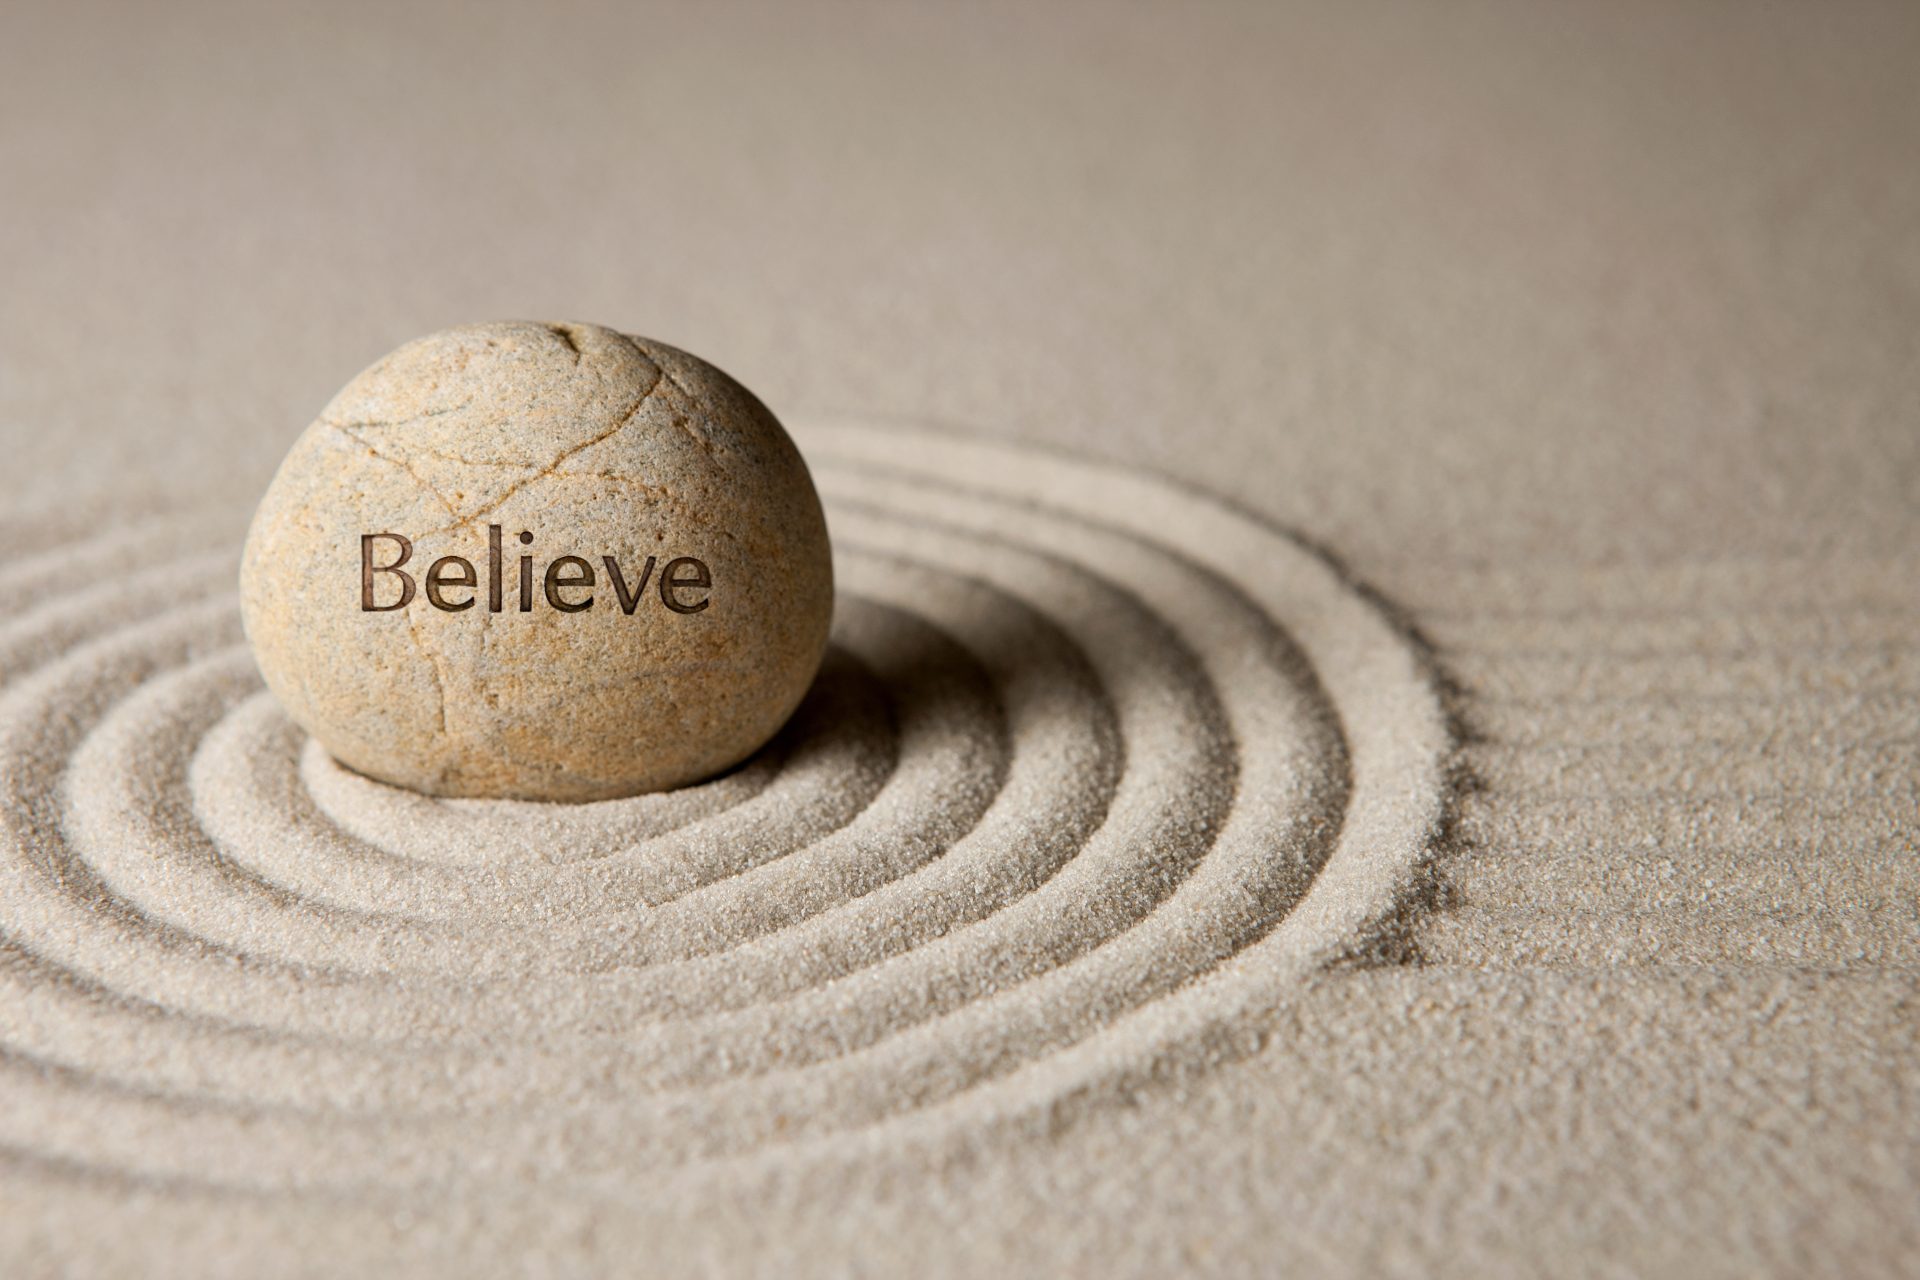 Believe... Achieve... Advance Confidently in the Direction of Your Dreams